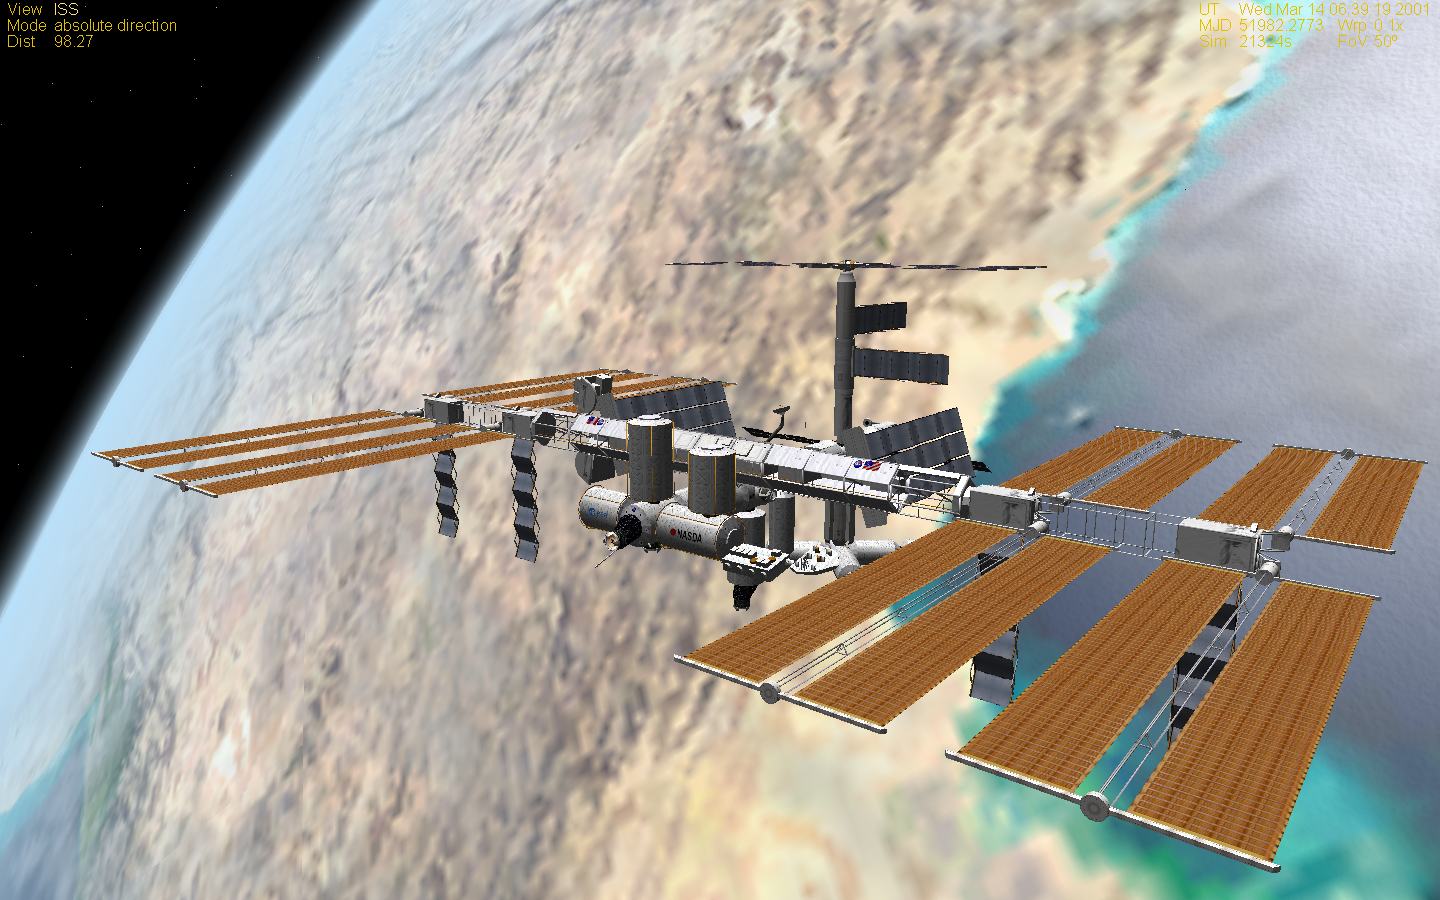 General 1440x900 space space station CGI International Space Station